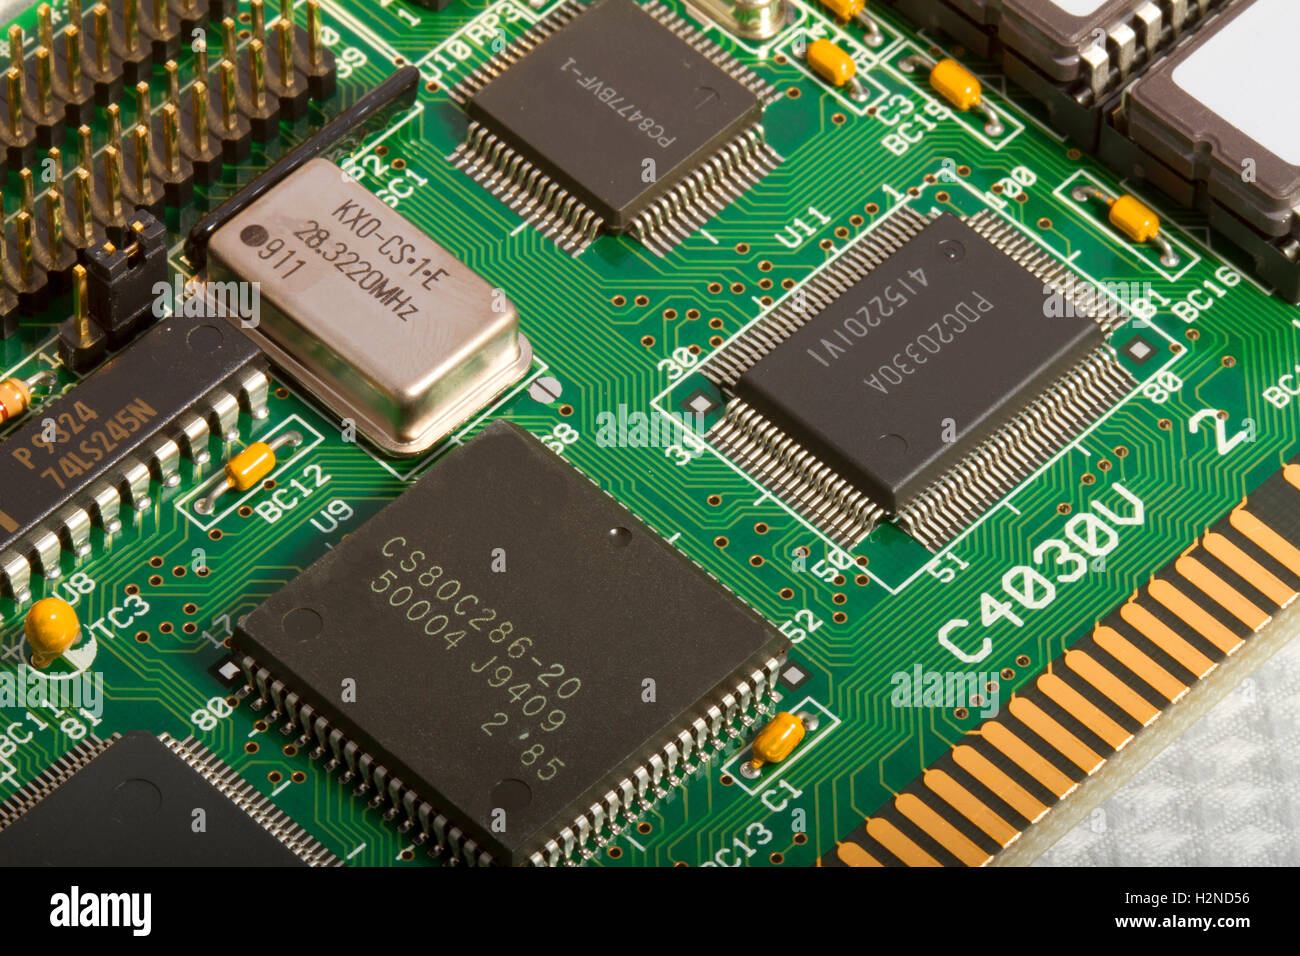 Electronic printed circuit board with components Stock Photo